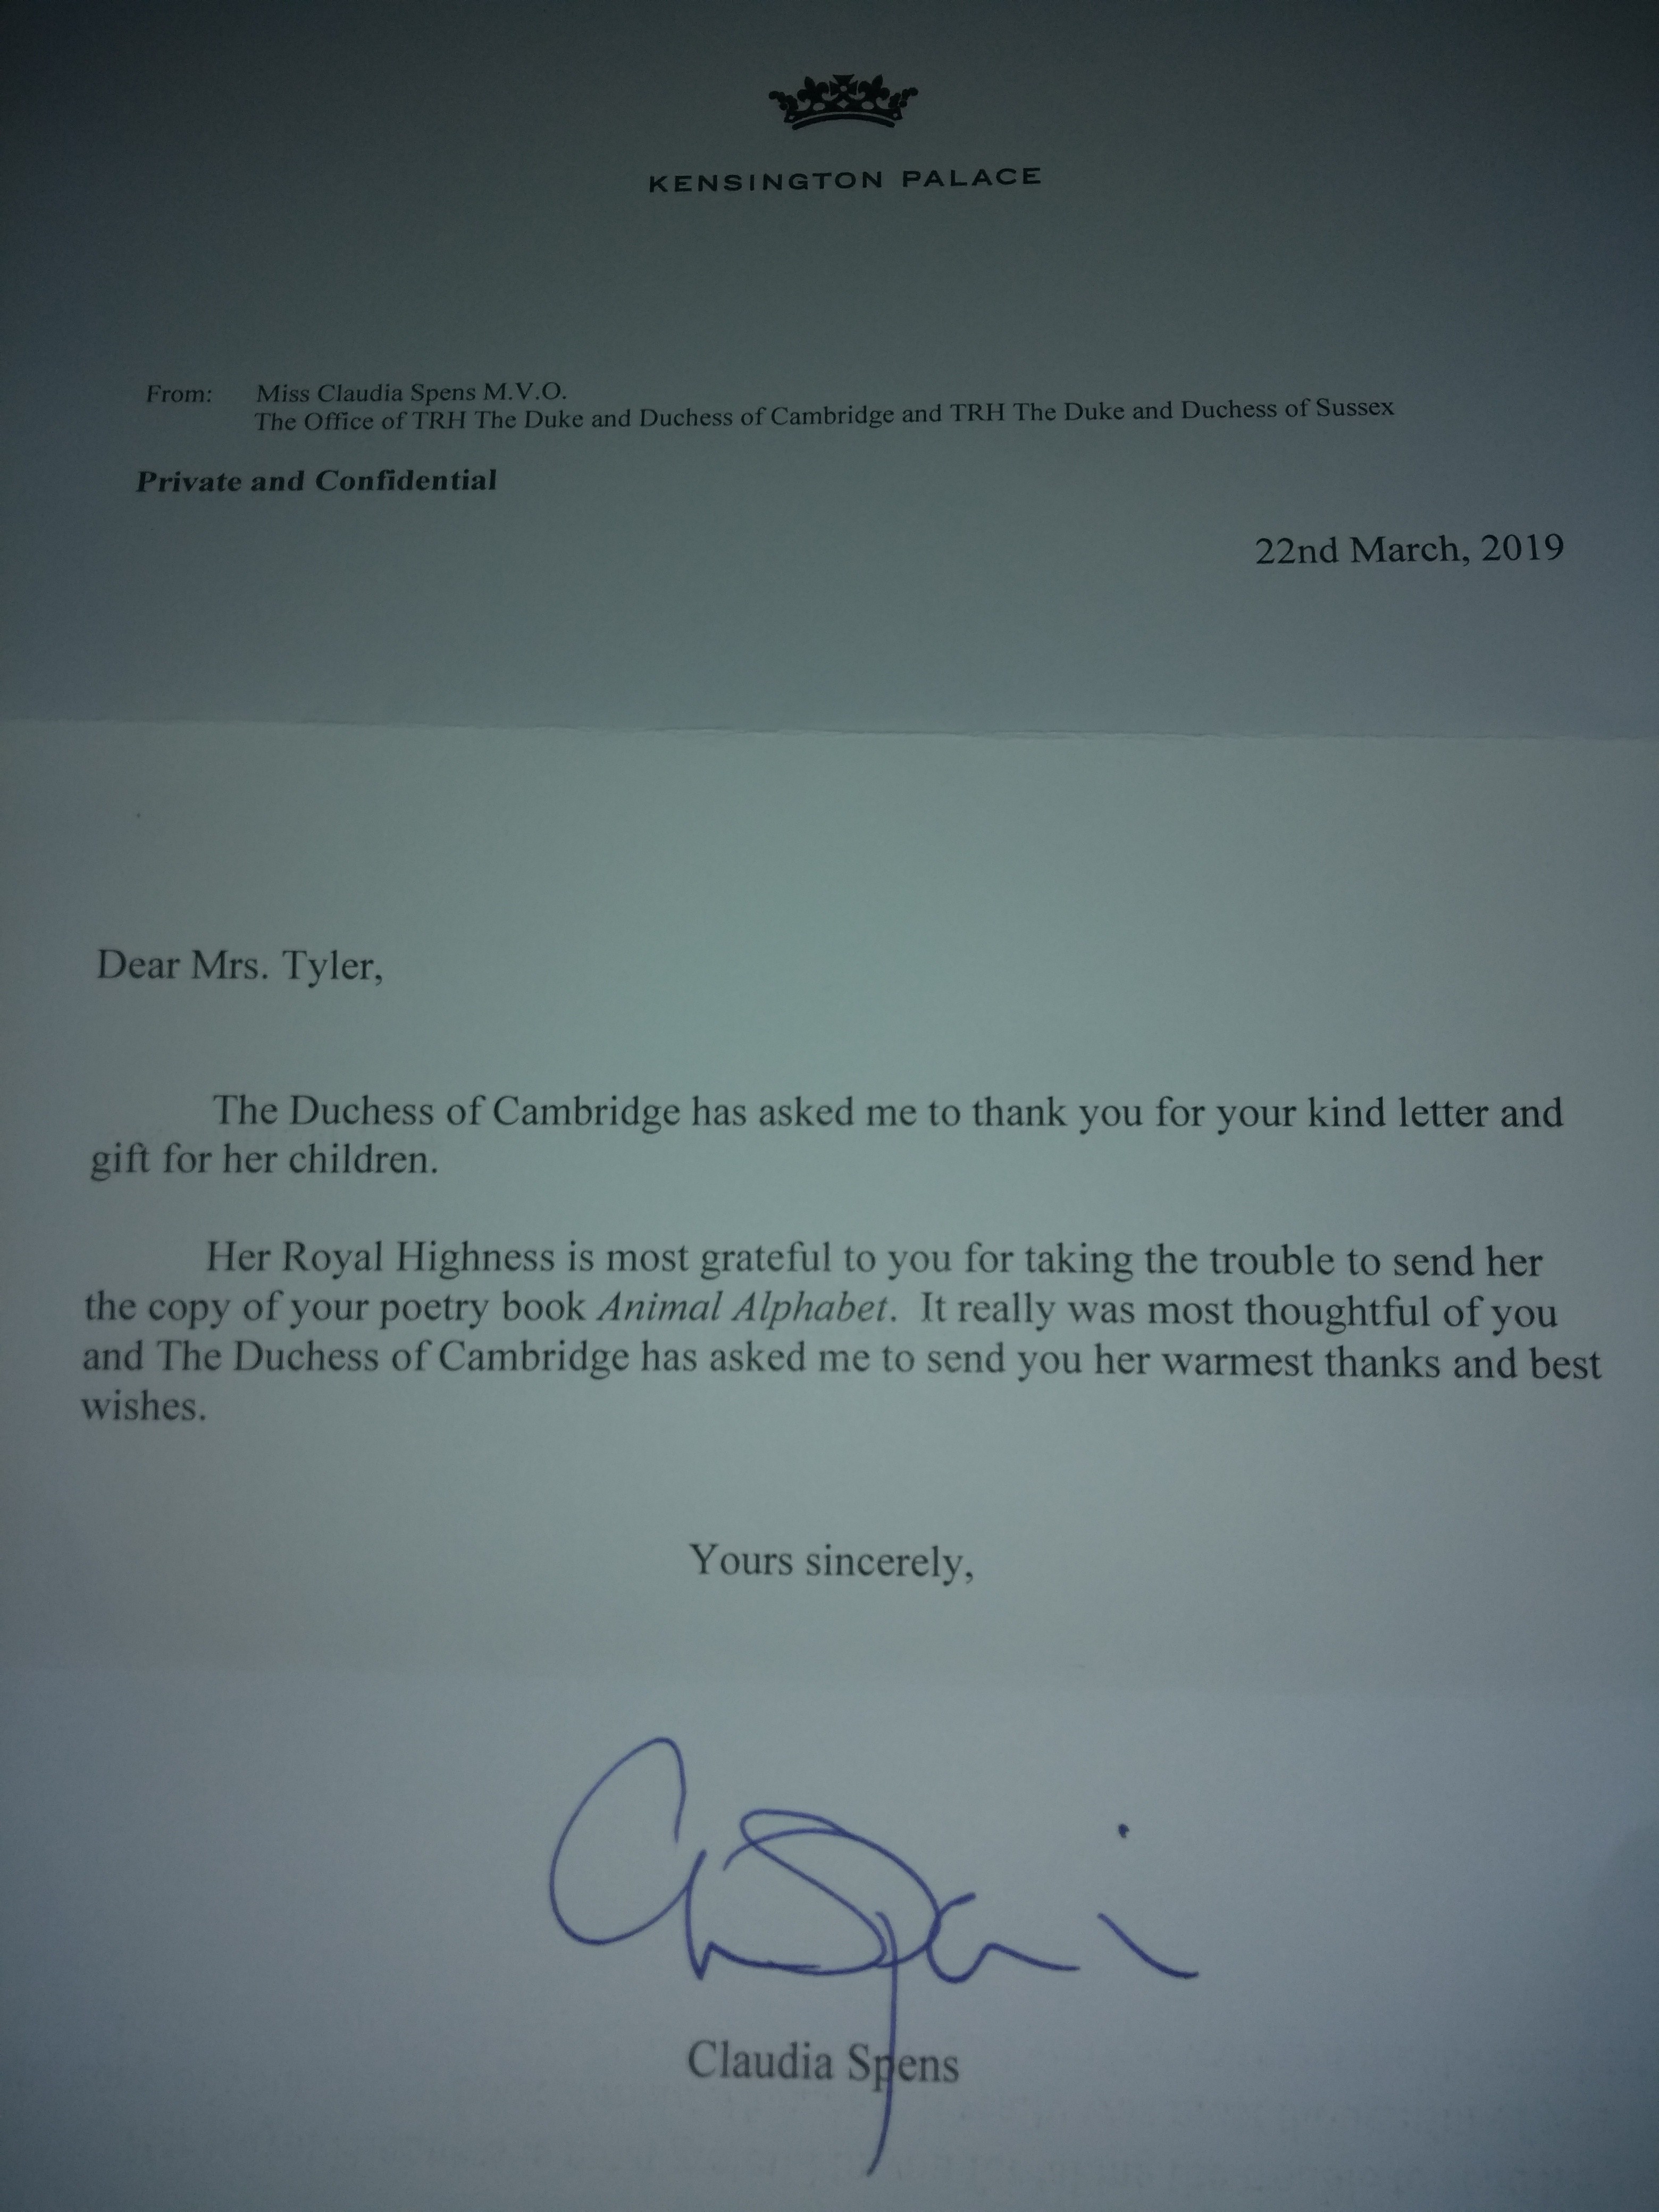 Author Maureen Tyler Receives a Letter of Thanks from Kensington Palace, London on Her Book